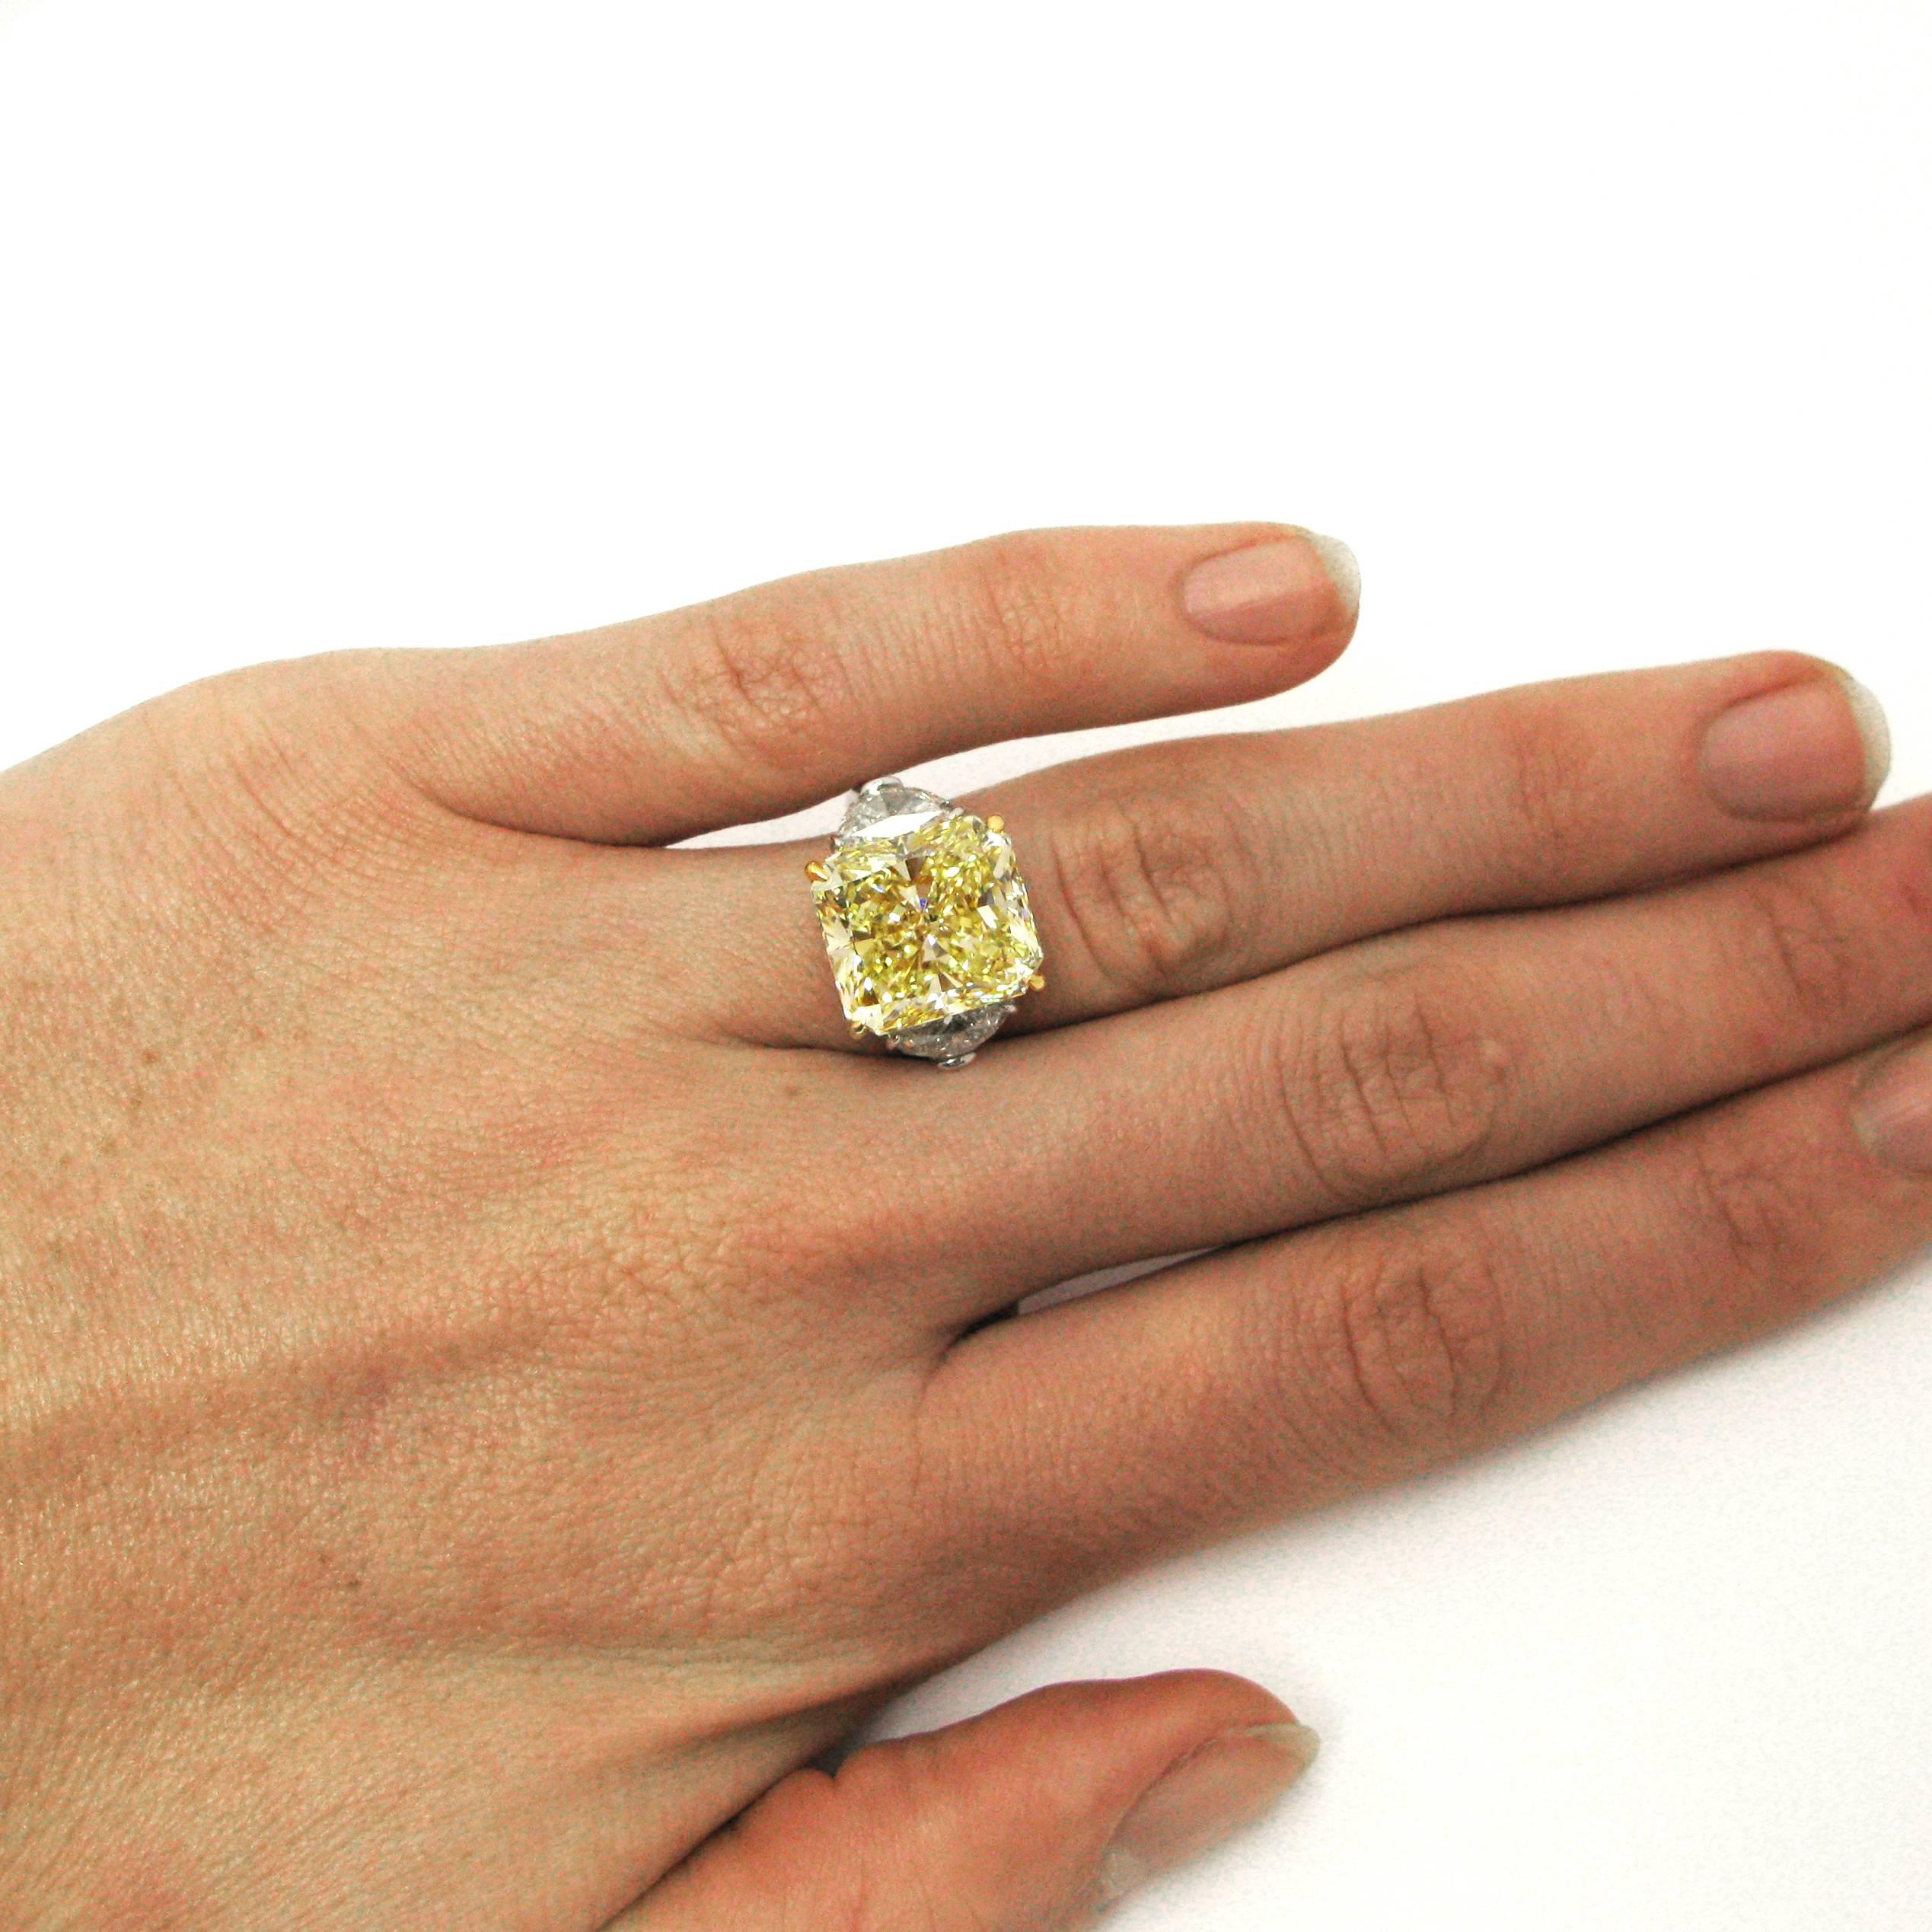 A stunning signed Harry Winston ring features a 10.01 carat Fancy Yellow radiant-cut diamond with VS1 clarity. This diamond is prong-set in an 18k yellow gold basket and flanked by two half-moon cut diamonds in platinum settings atop a platinum ring